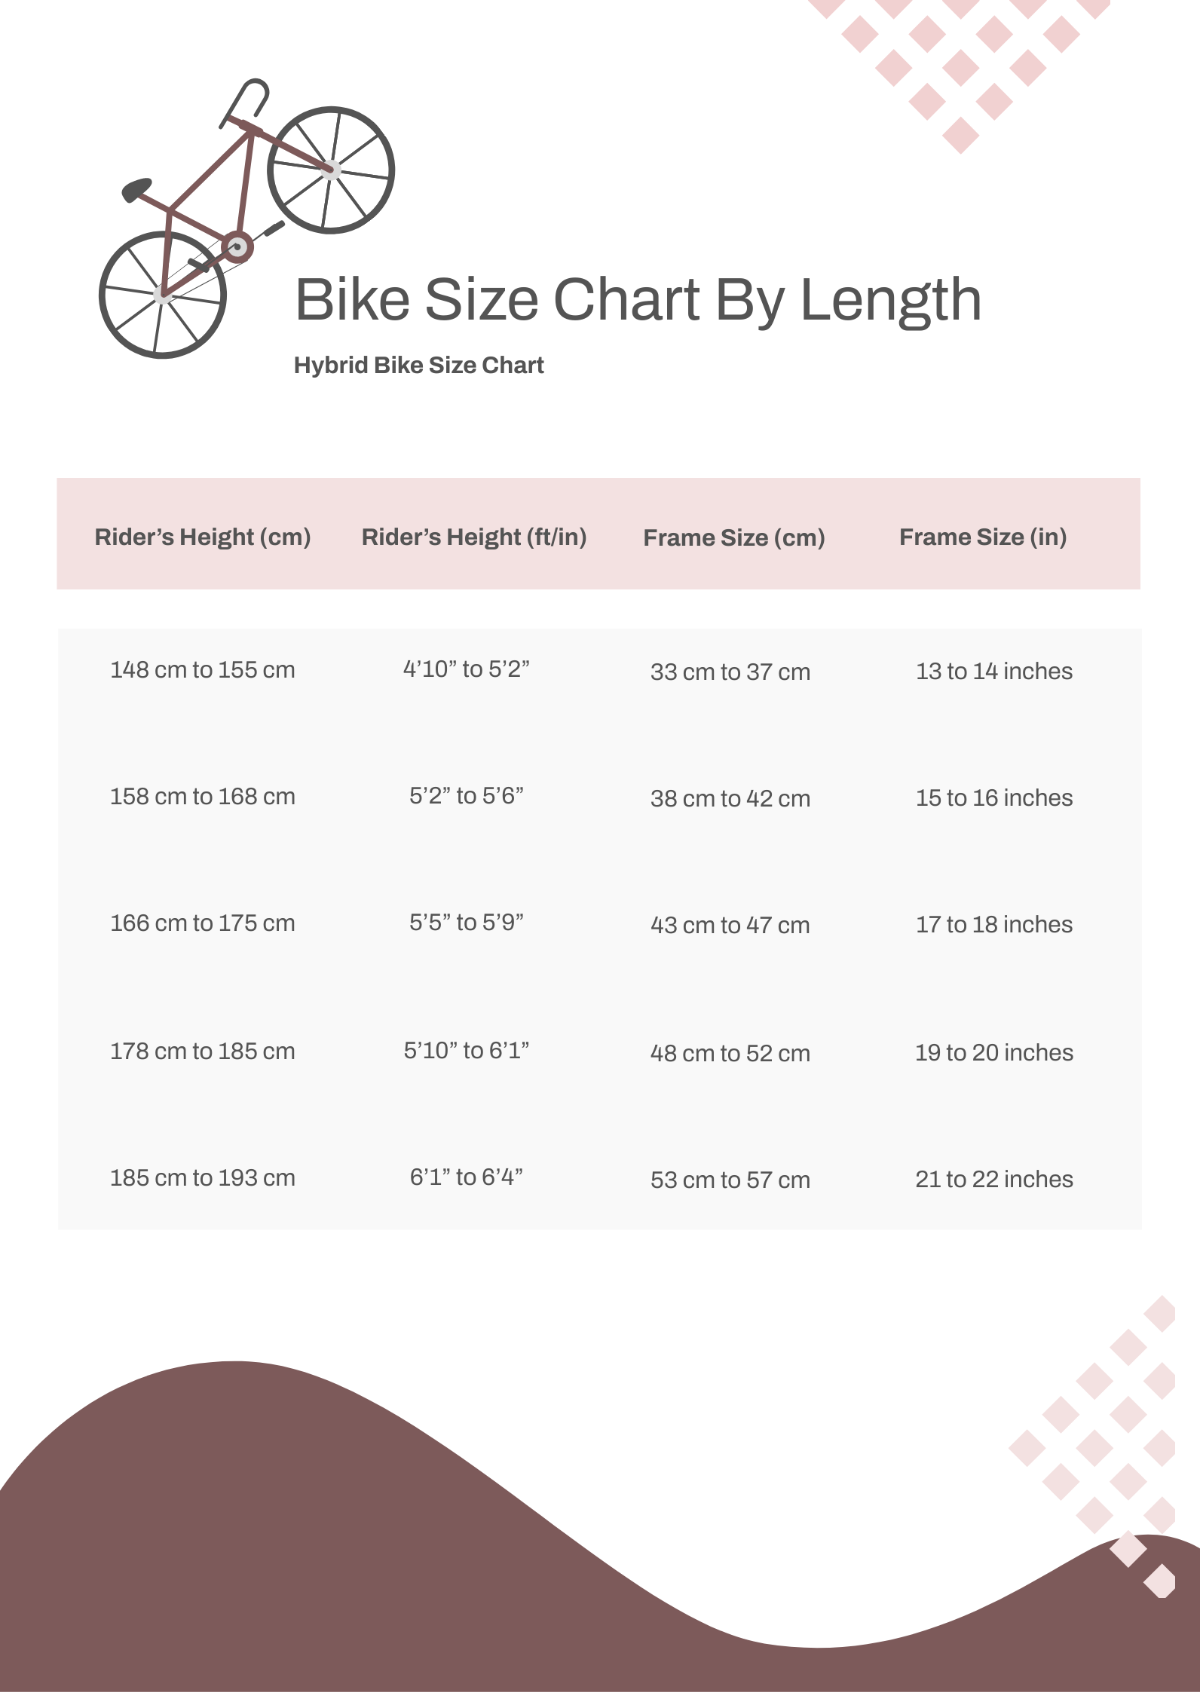 Bike Size Chart By Length Template